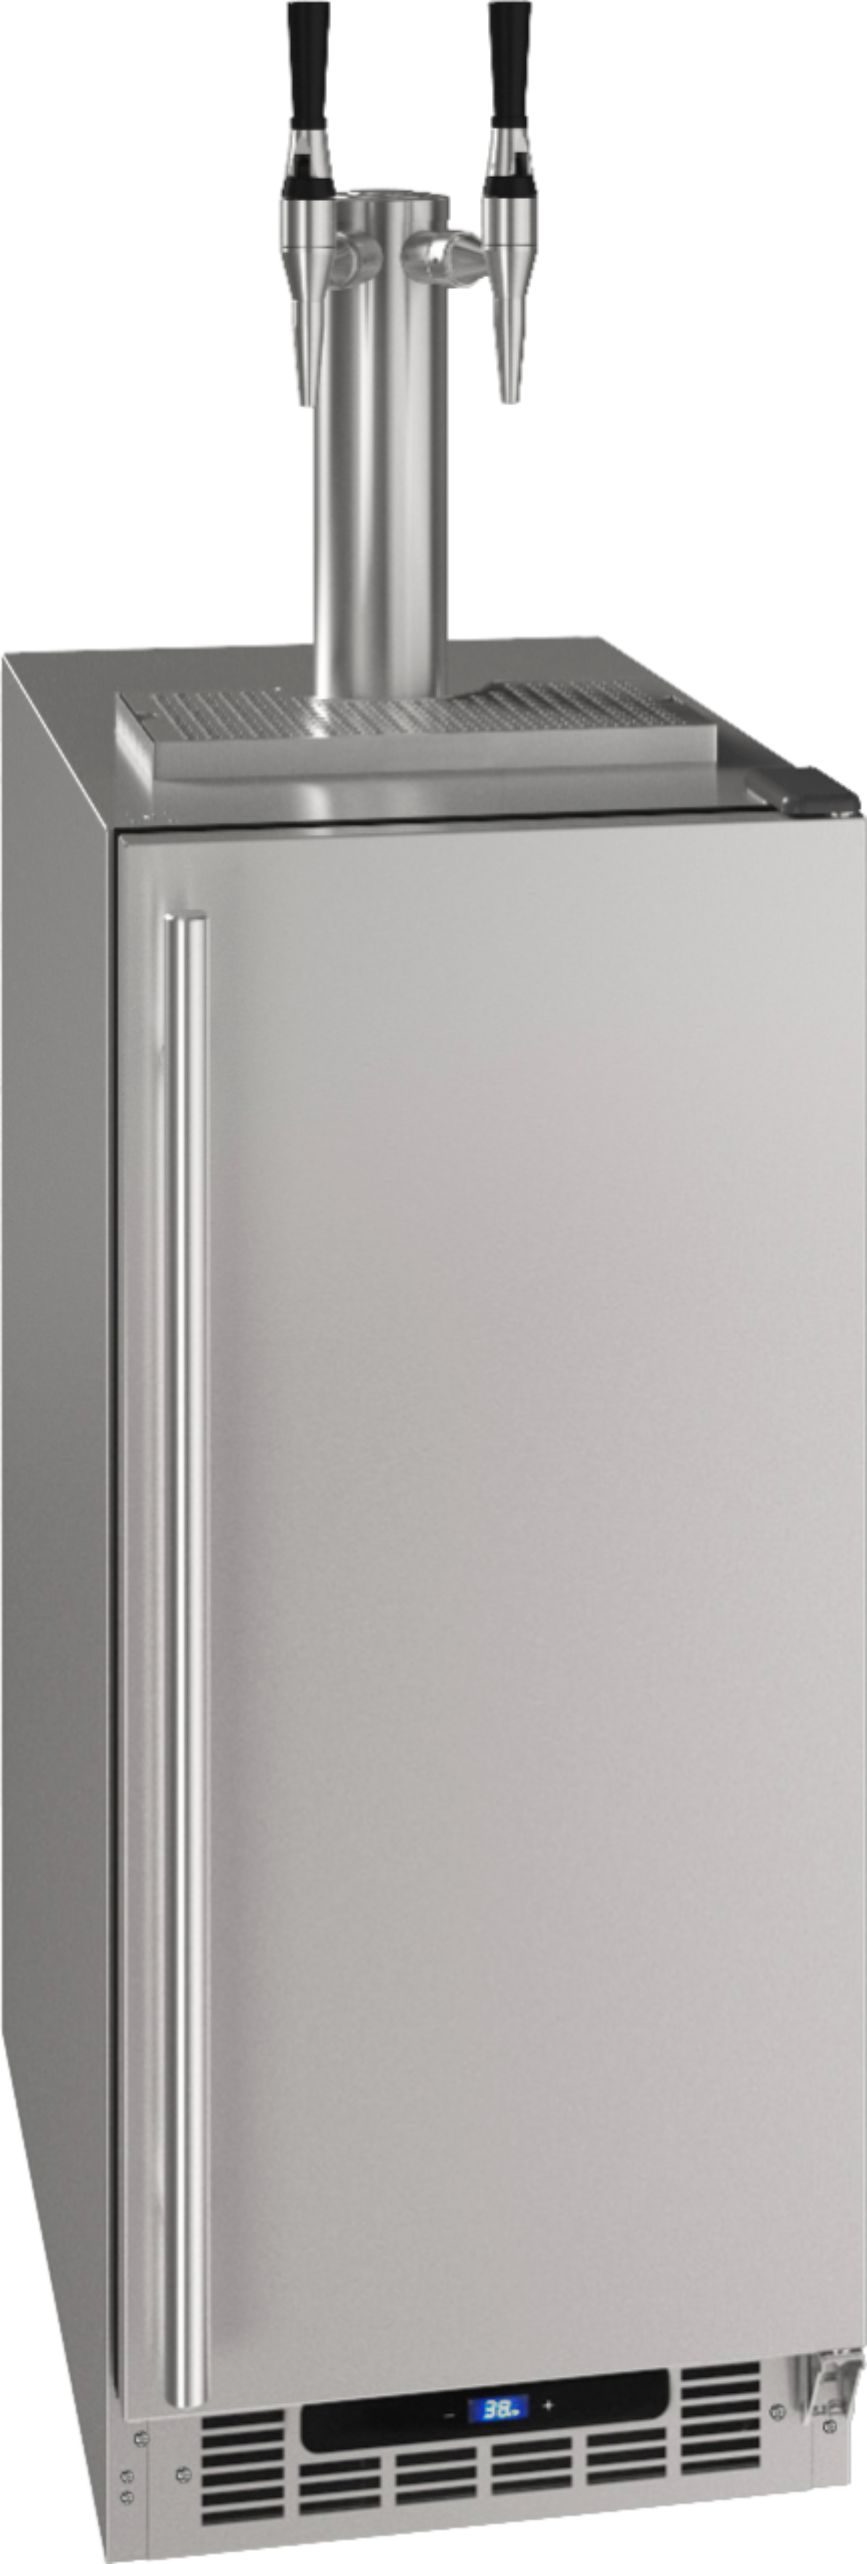 Angle View: U-Line - 3.6 Cu. Ft. 2-Tap Beverage Cooler and Kegerator - Stainless steel